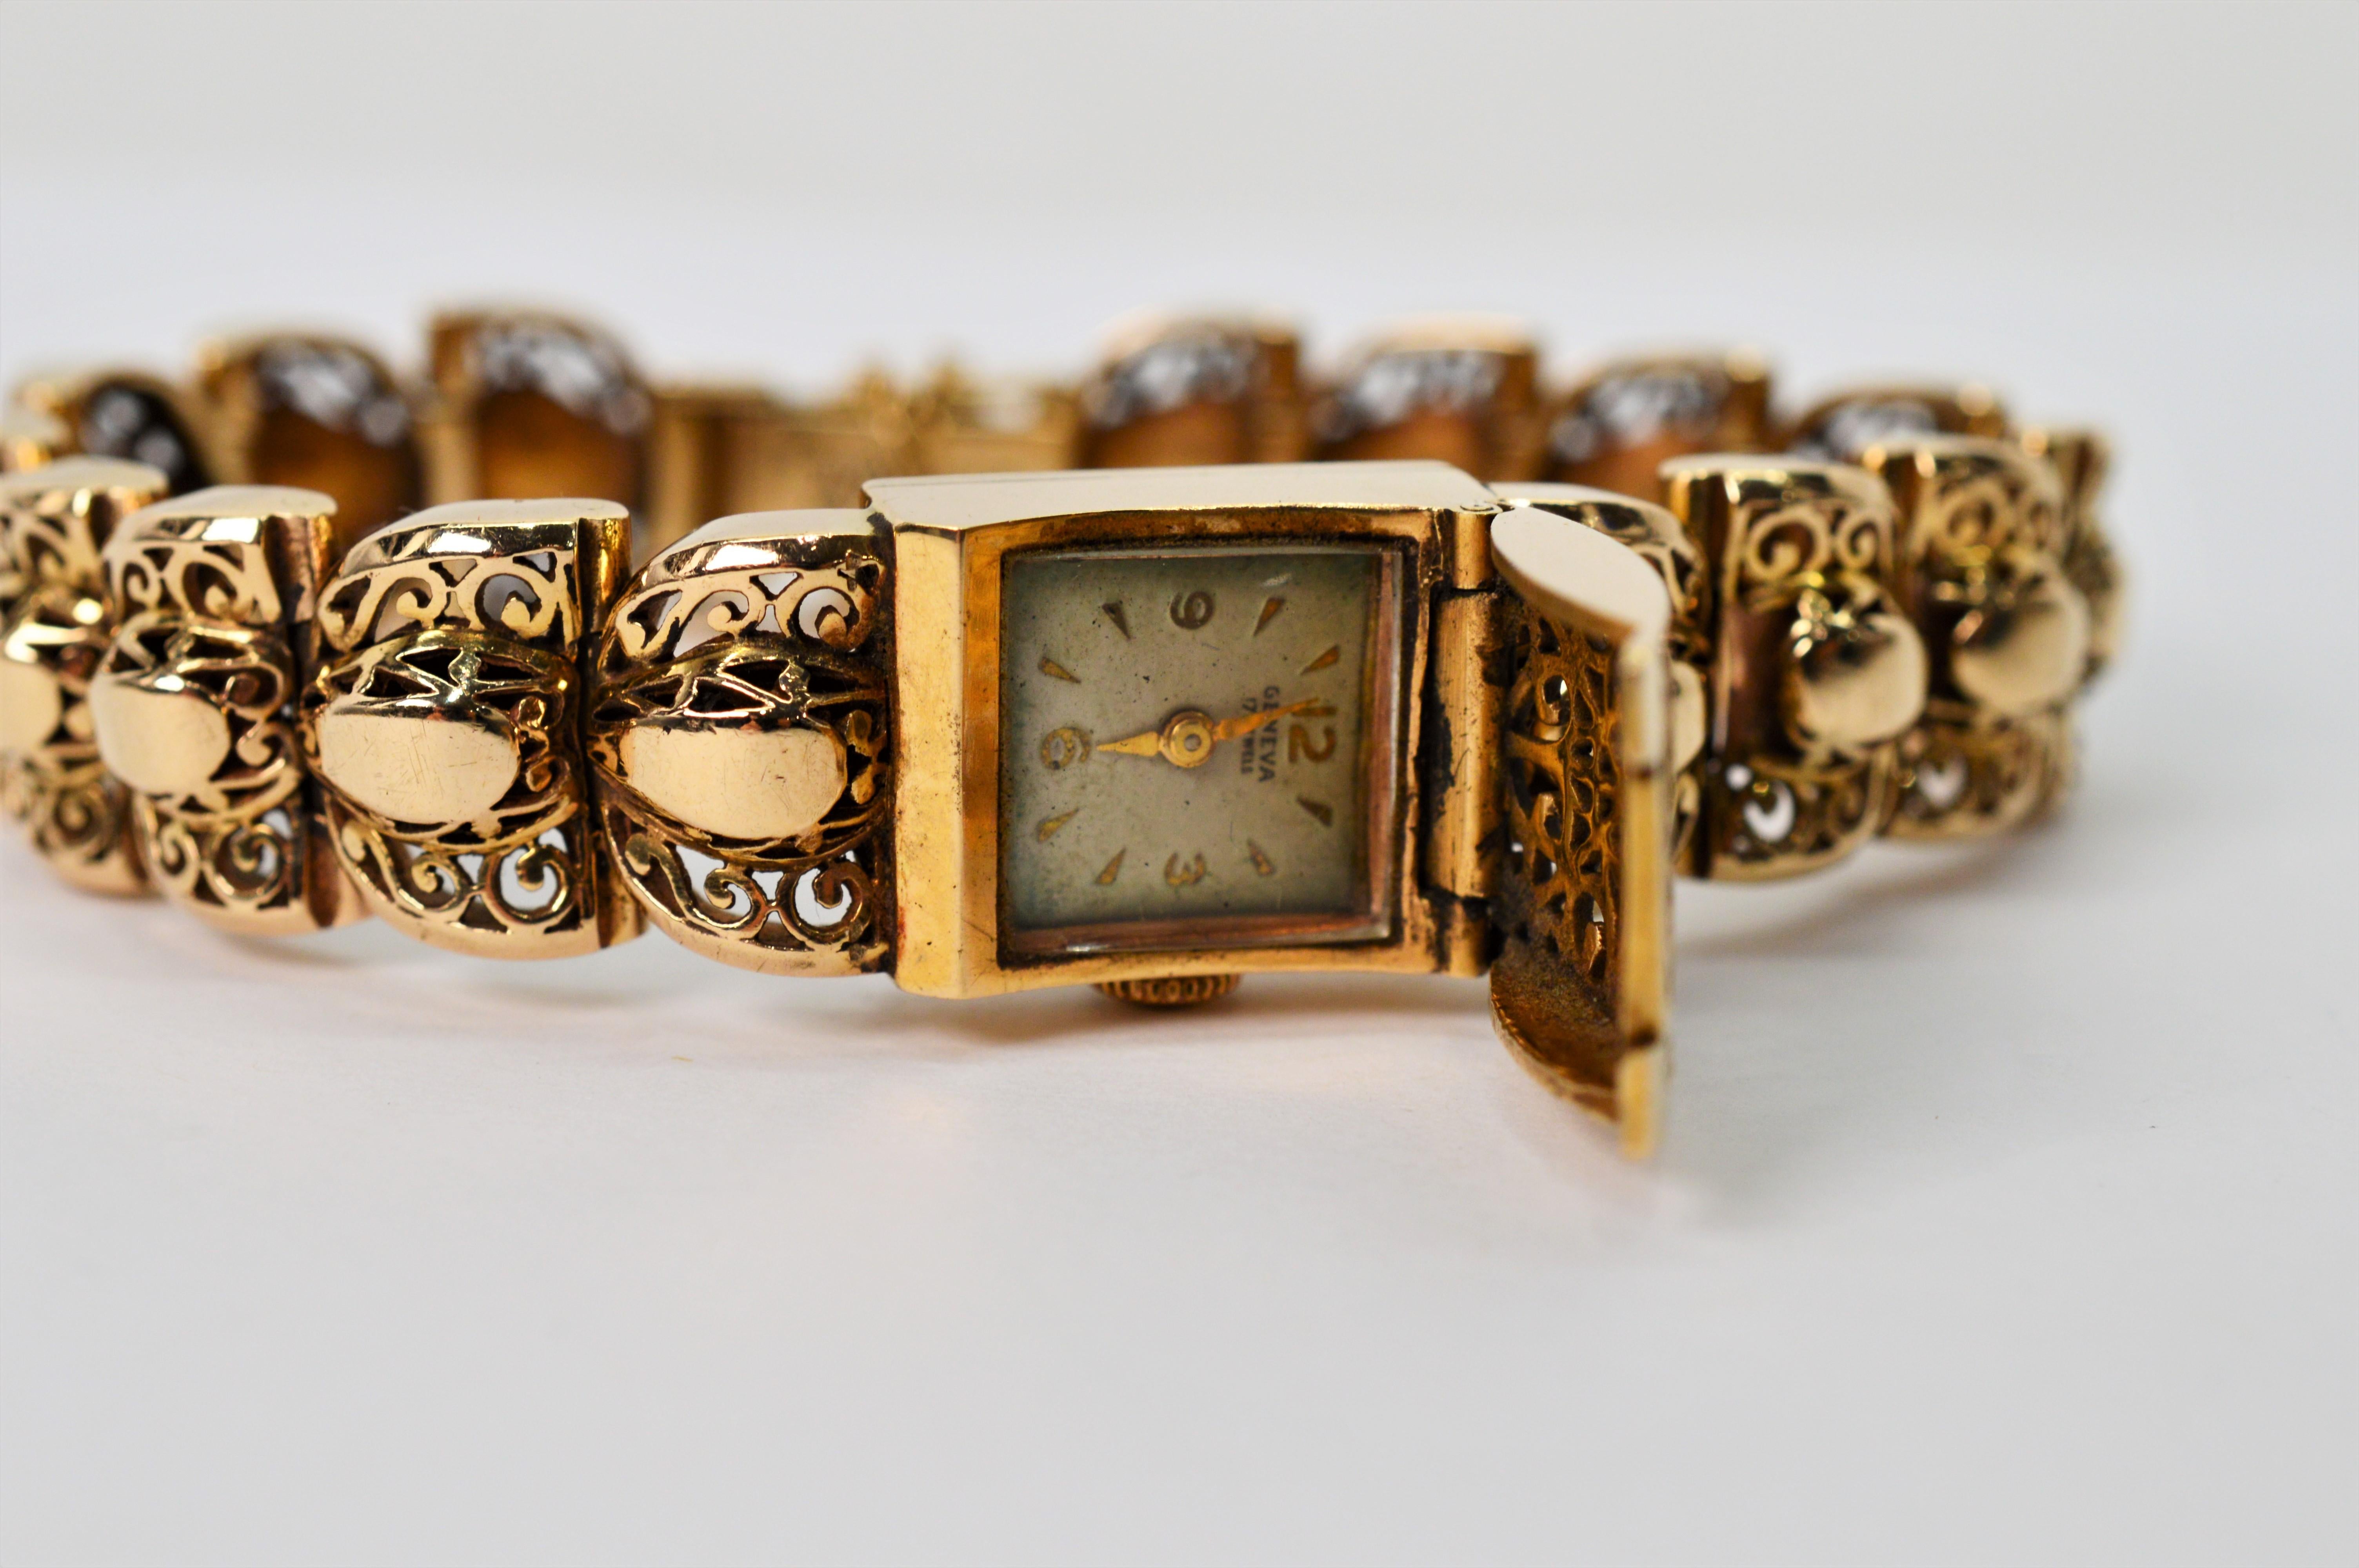 Fancy filigree links of fourteen karat 14K yellow gold create the 7-1/2 inch bracelet of this 1950's ladies wristwatch. The complementing large center charm link with filigree cover conceals a Rosieres Geneva manual wind 17 jeweled watch with white